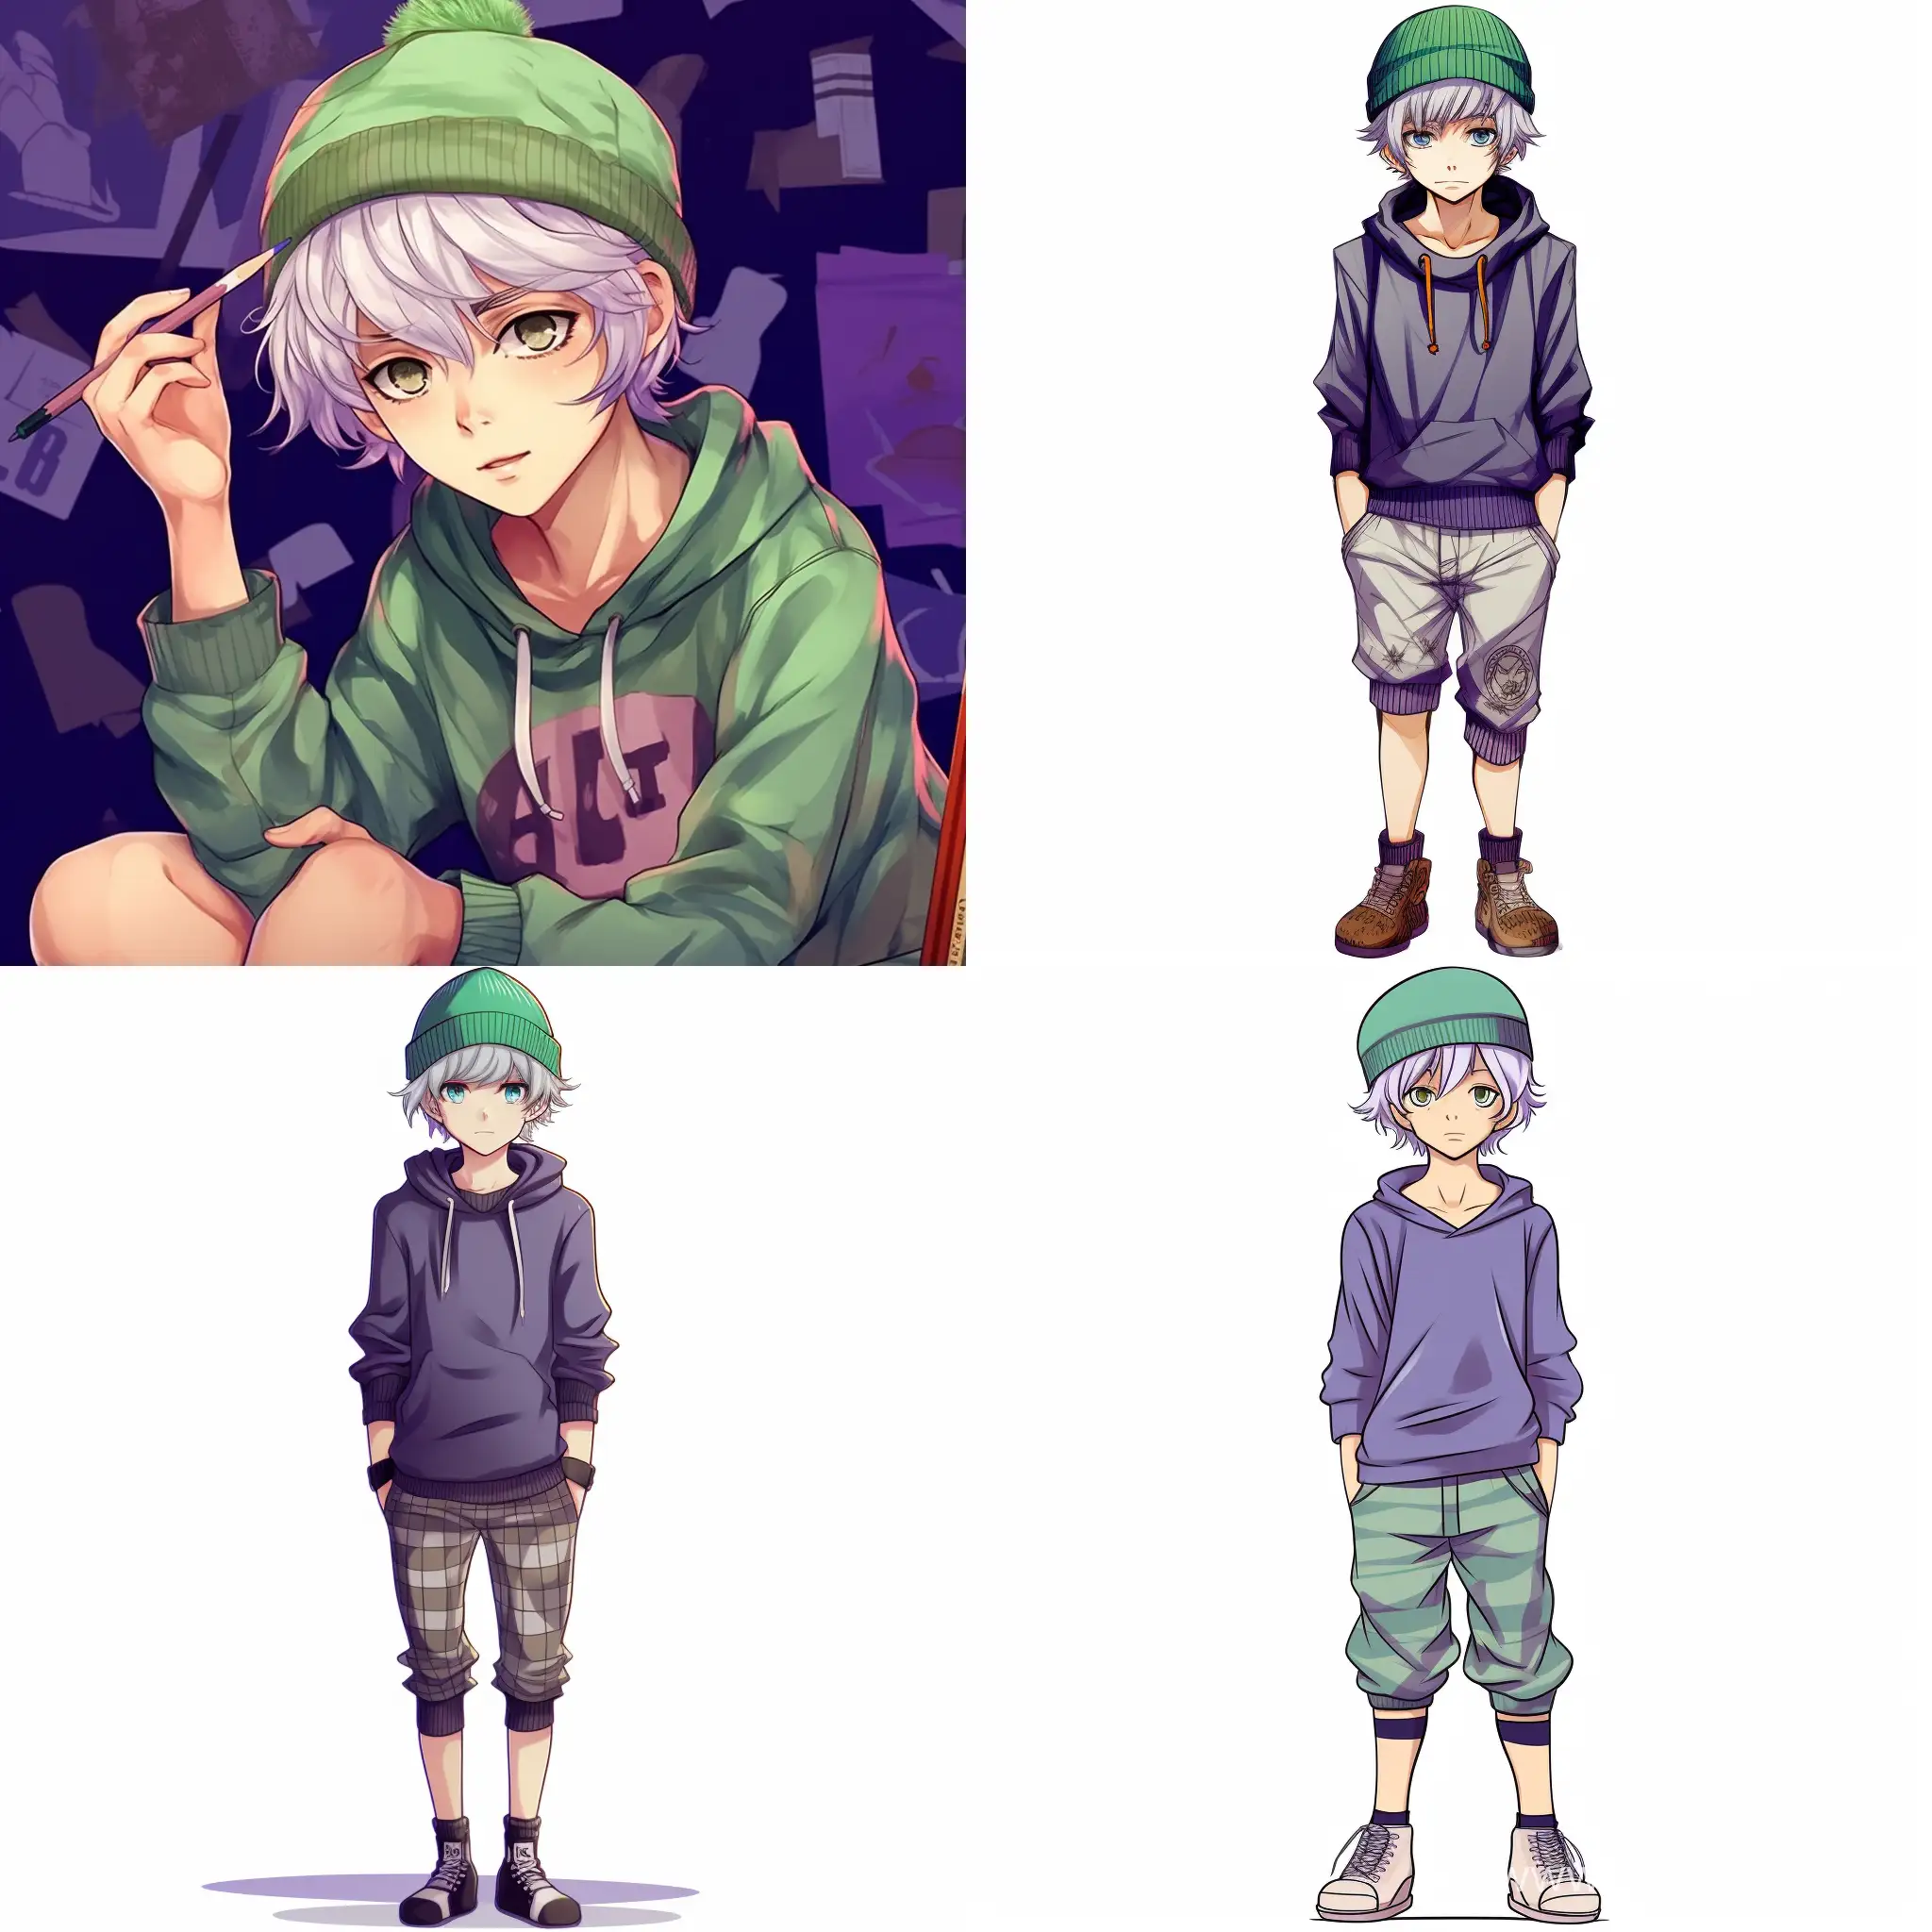 Eccentric-Anime-Character-14YearOld-Boy-with-DualColored-Eyes-and-Unique-Fashion-Style